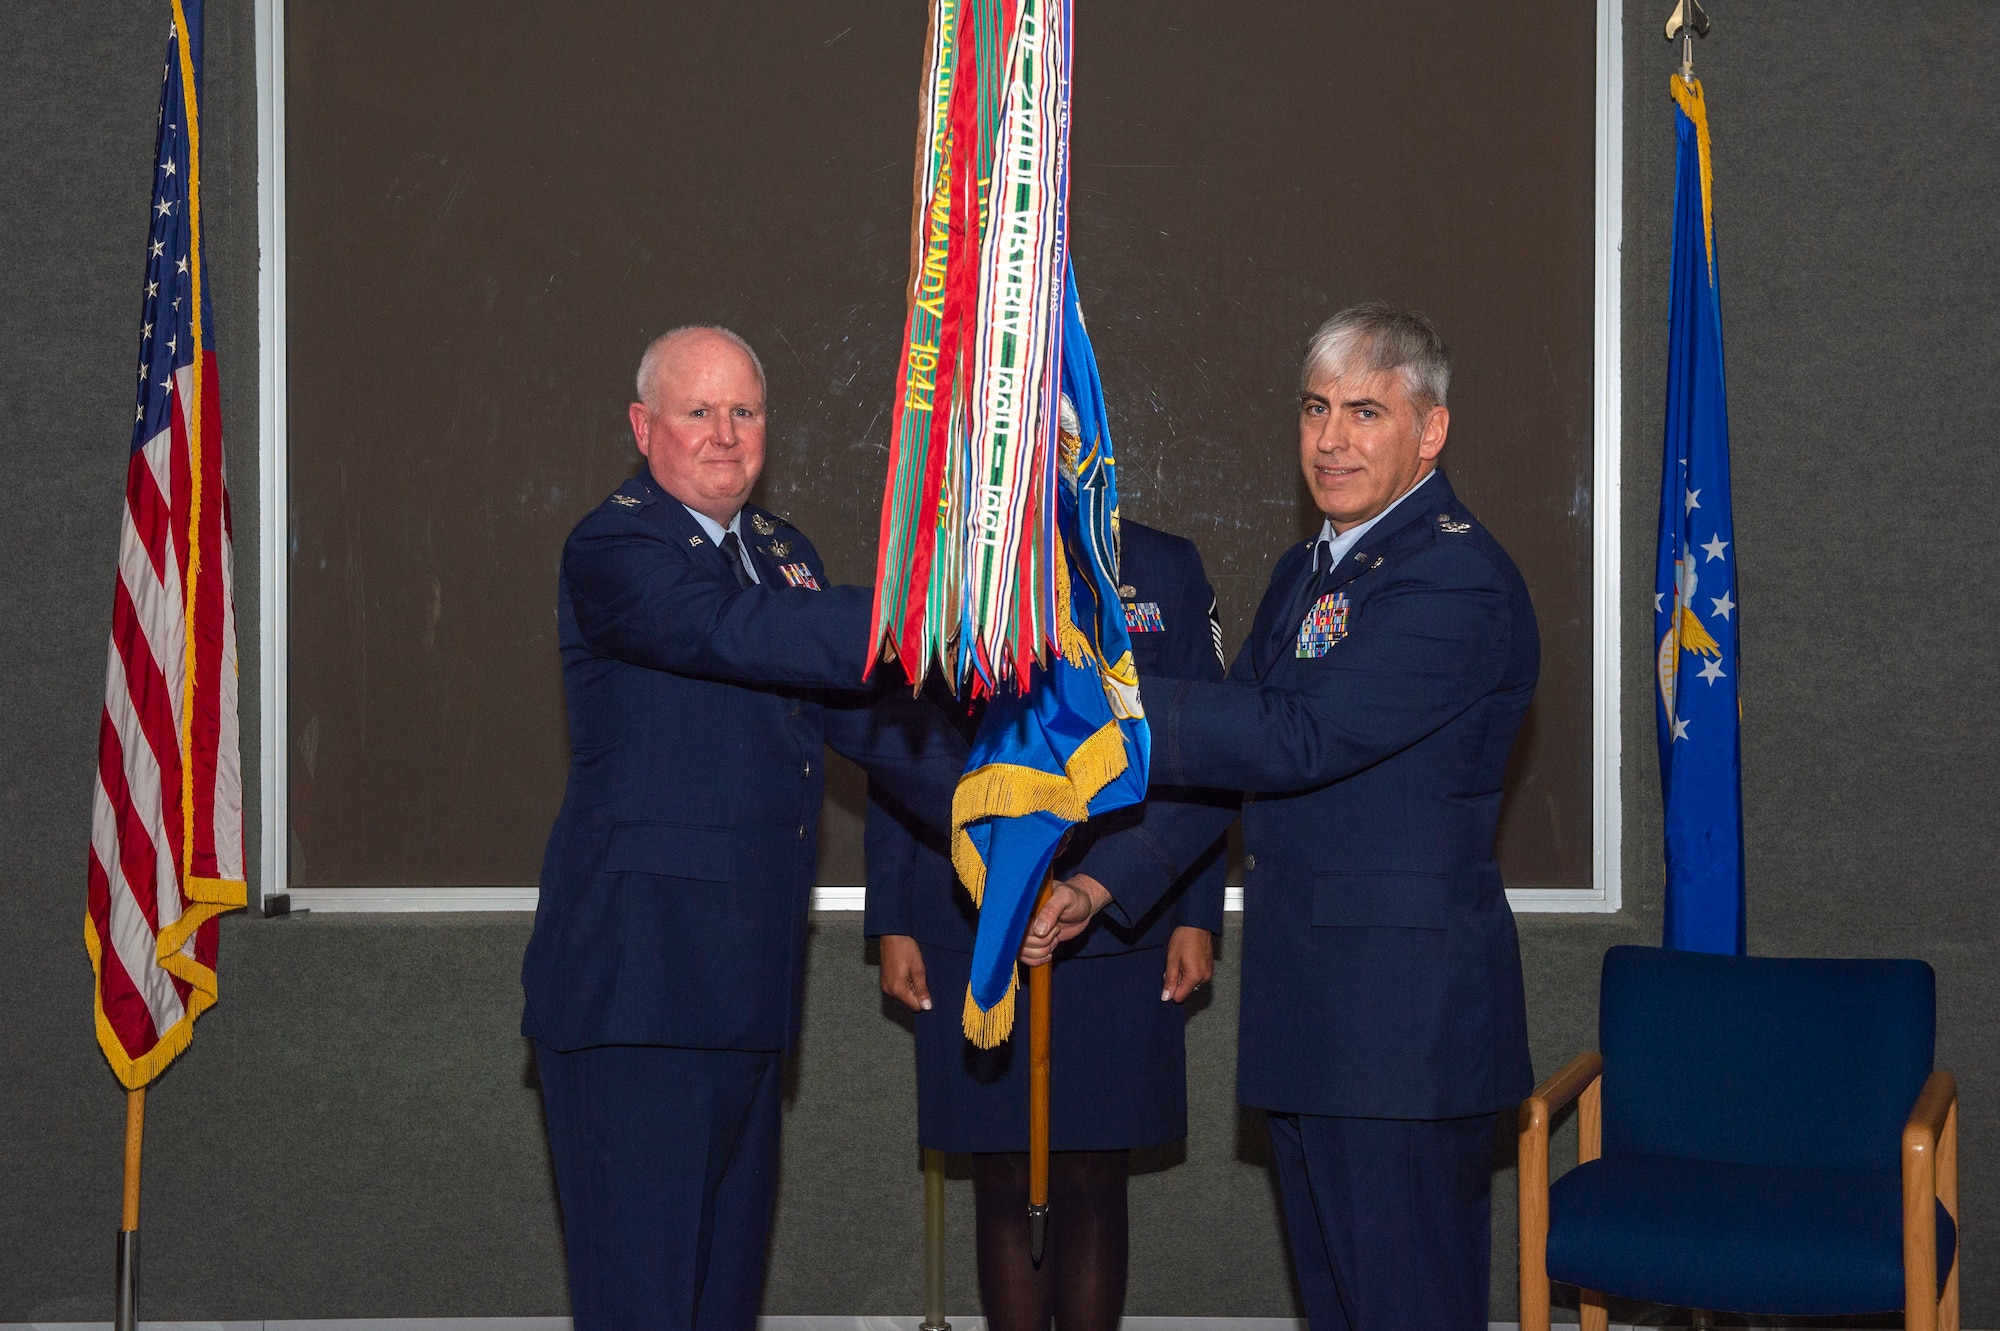 Col. Thomas Pemberton, 434th Air Refueling Wing commander, hands the guidon of the 434th Operations Group to Col. Douglas Perry Jr. at Gus Grissom Hall on Grissom Air Reserve Base, Ind., Mar. 6. Perry received command of the group during a dual ceremony in which he pinned on the rank of colonel as well. (U.S. Air Force photo by Staff Sgt. Michael Hunsaker)